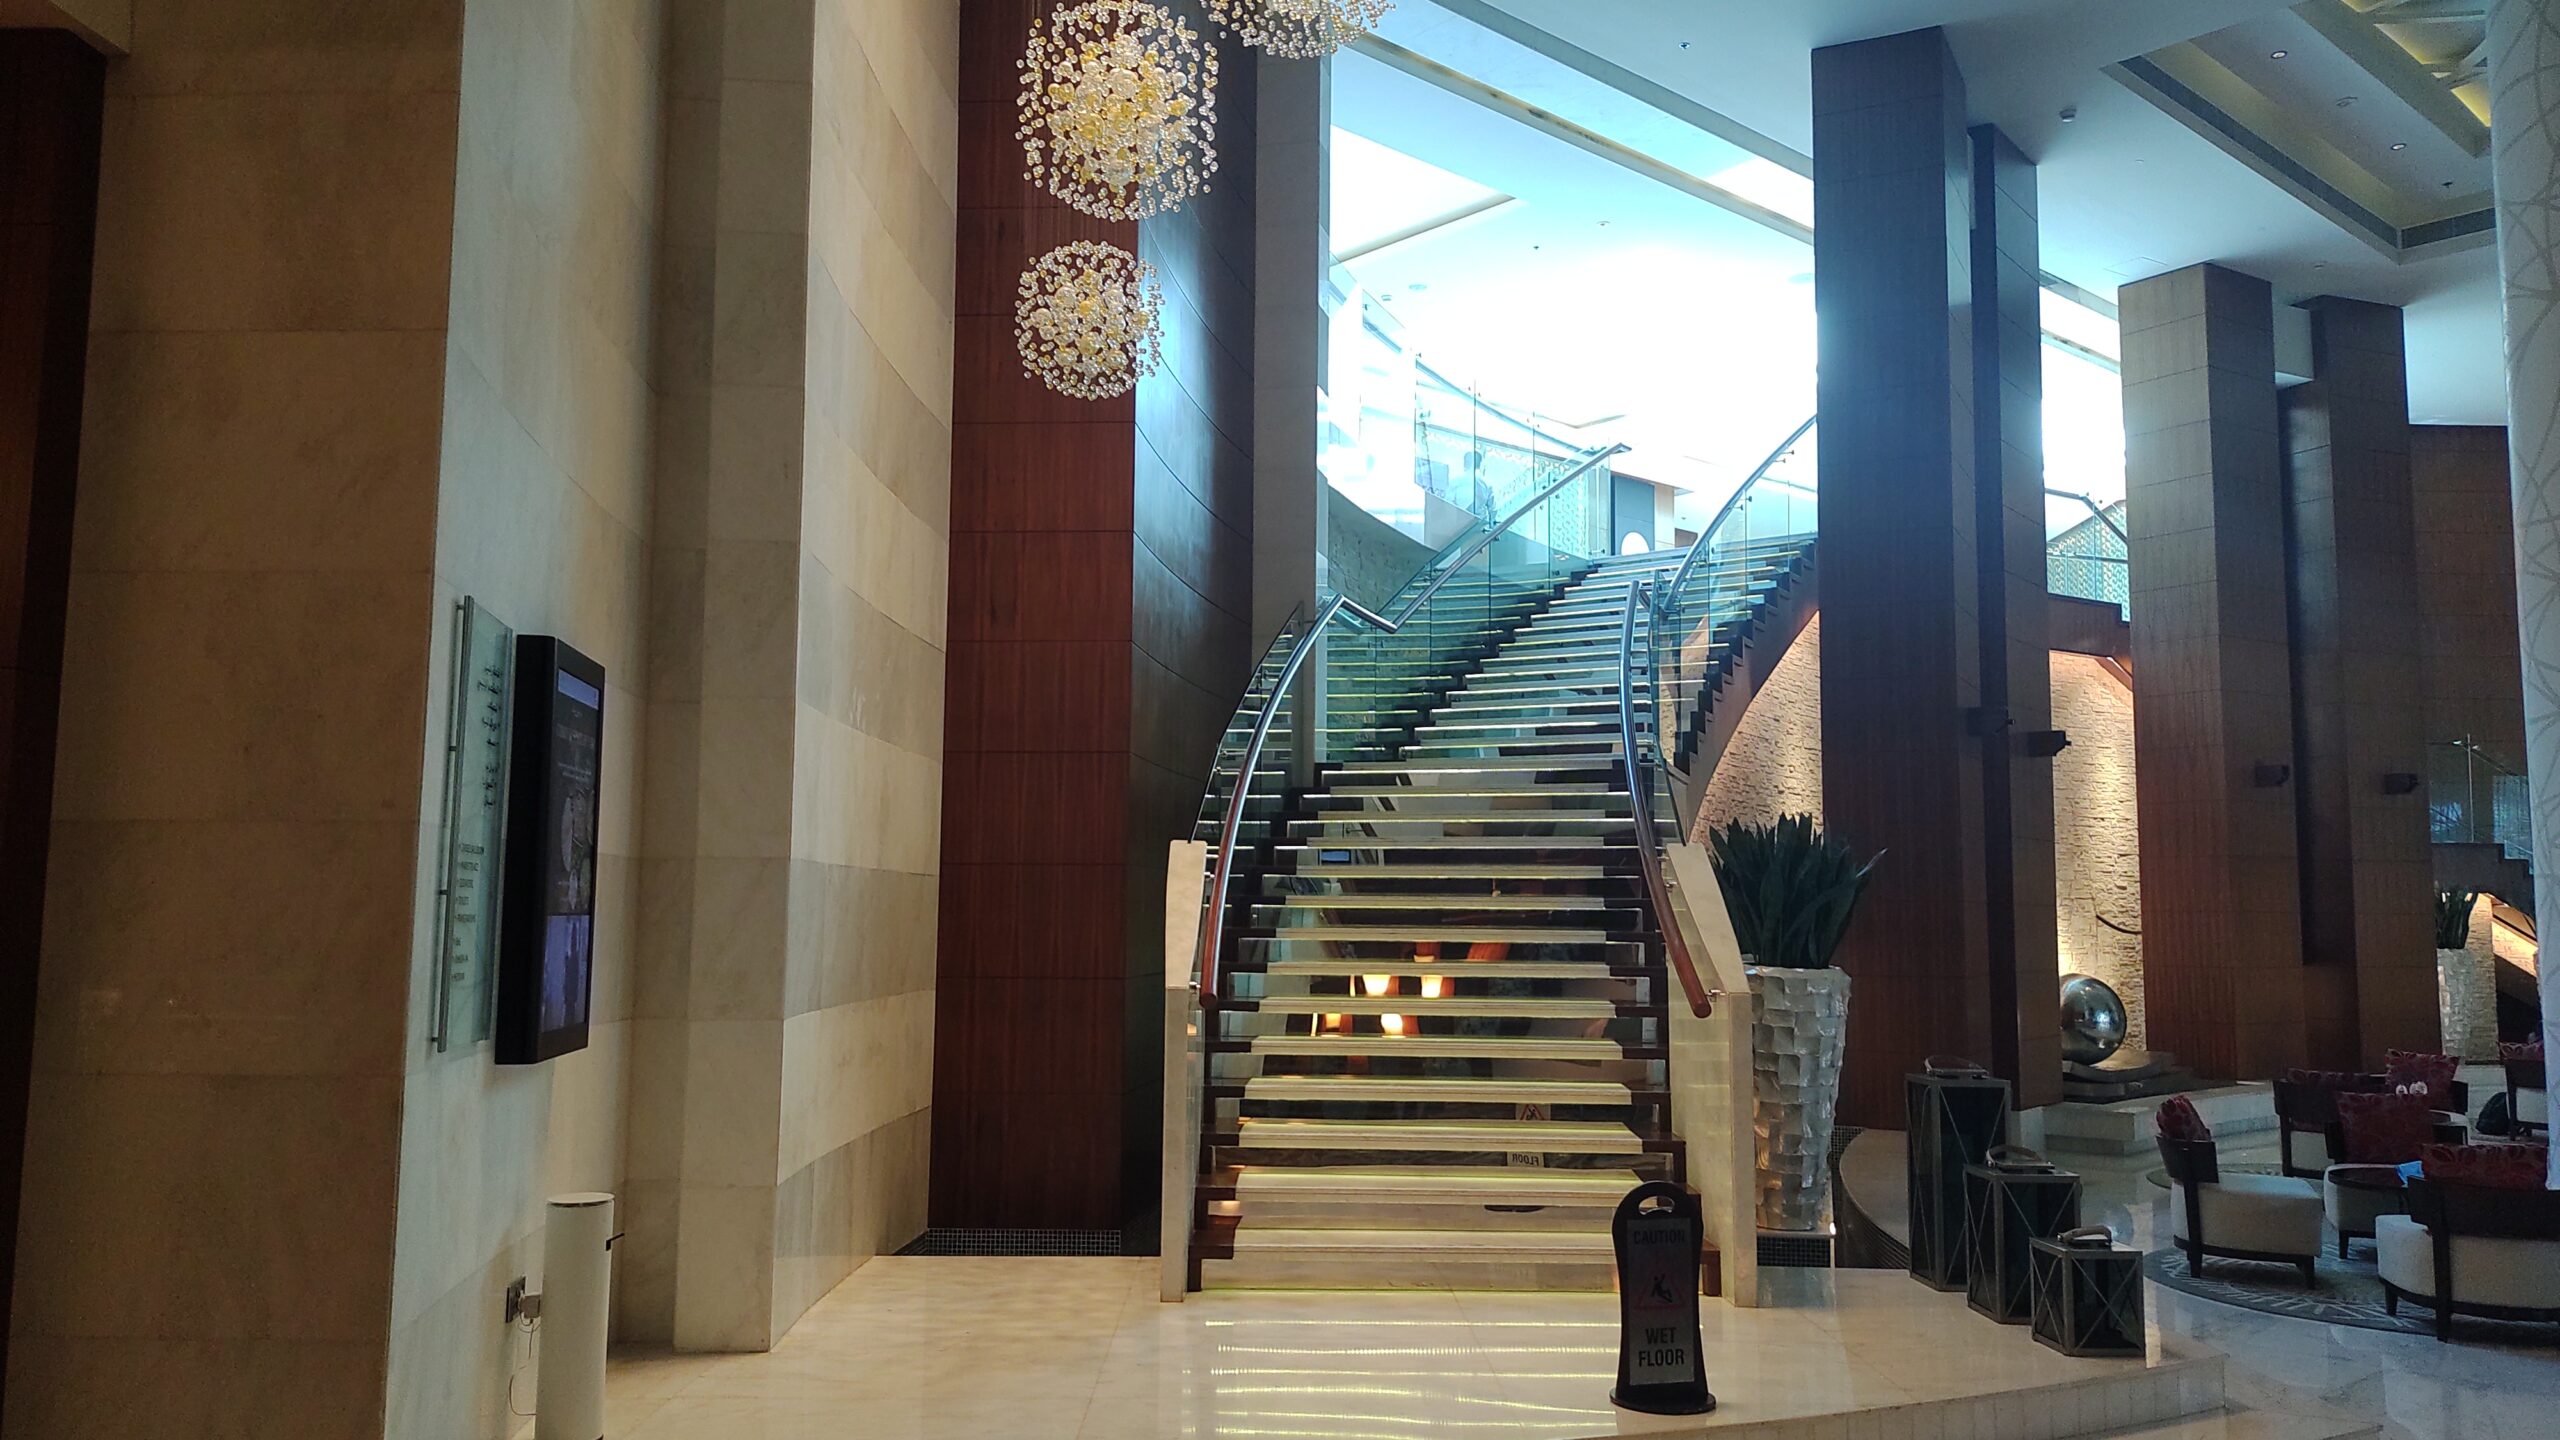 PICTURE OF THE STAIRCASE IN THE LOBBY LEADING TO THE SECOND FLOOR.